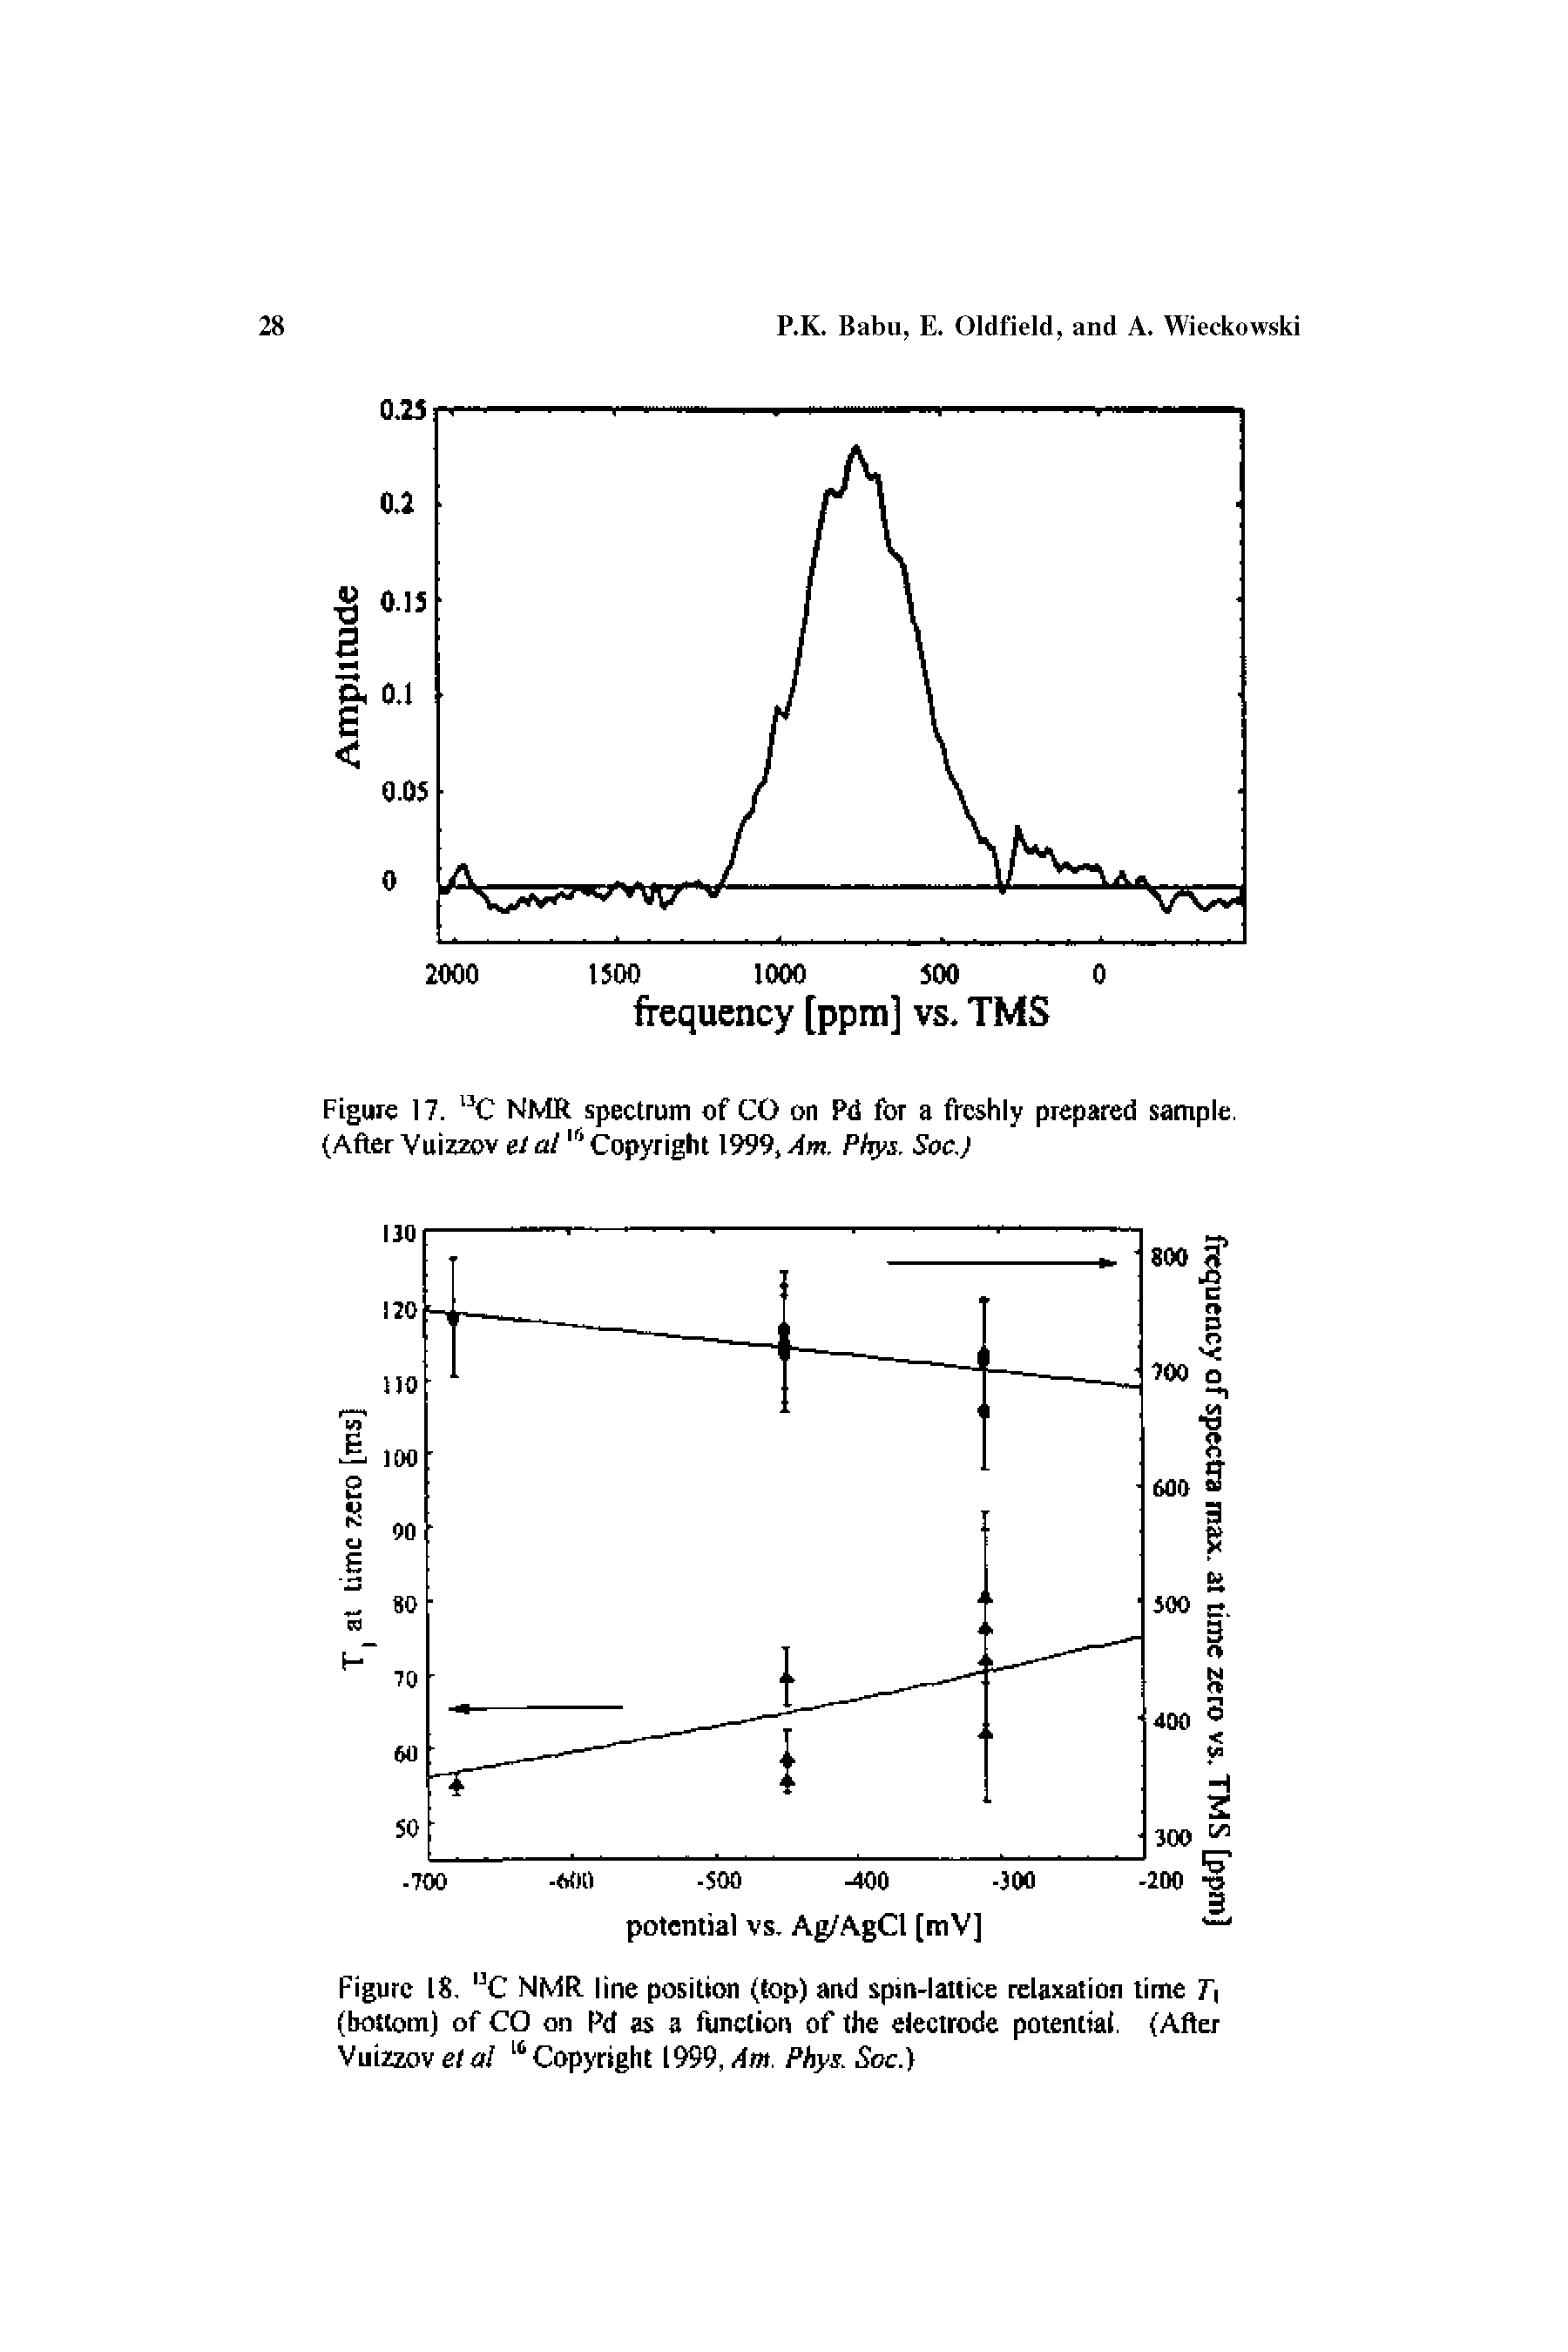 Figure 18, C NMR. line position (top) and spin-lattice relaxation lime T (bottom) of CO on Pd as a function of the electrode potential. (After Vuizzov eta Copyright 1999, Am. Phys. Soc.)...